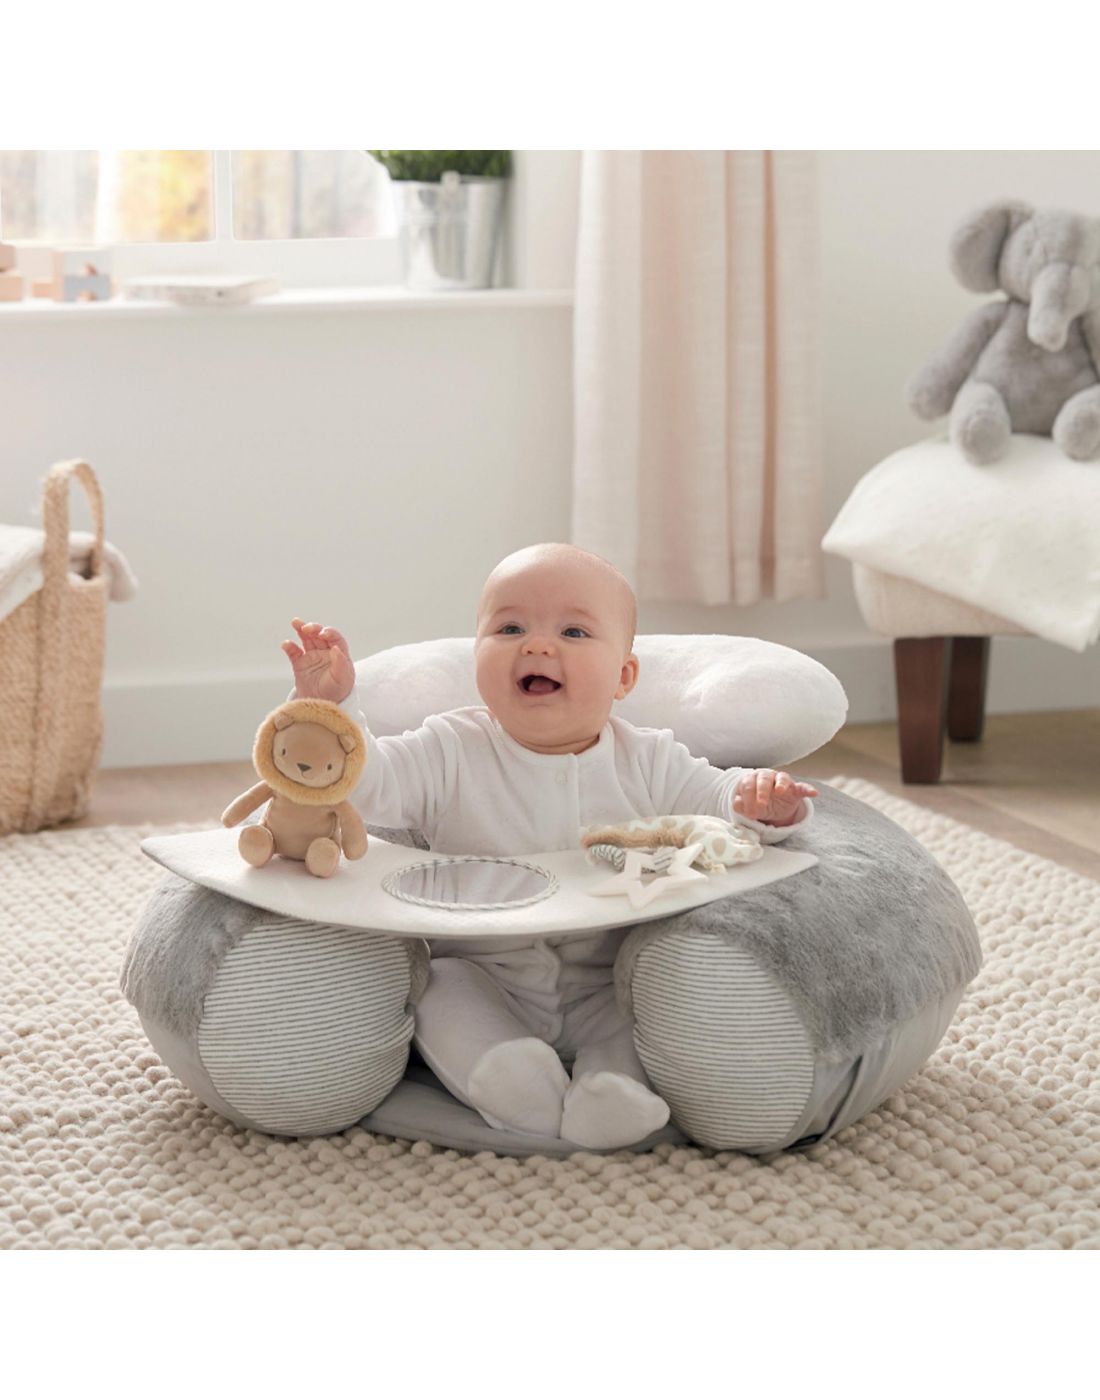 Mamas & Papas Welcome to the World Sit & Play Elephant Interactive Seat Grey